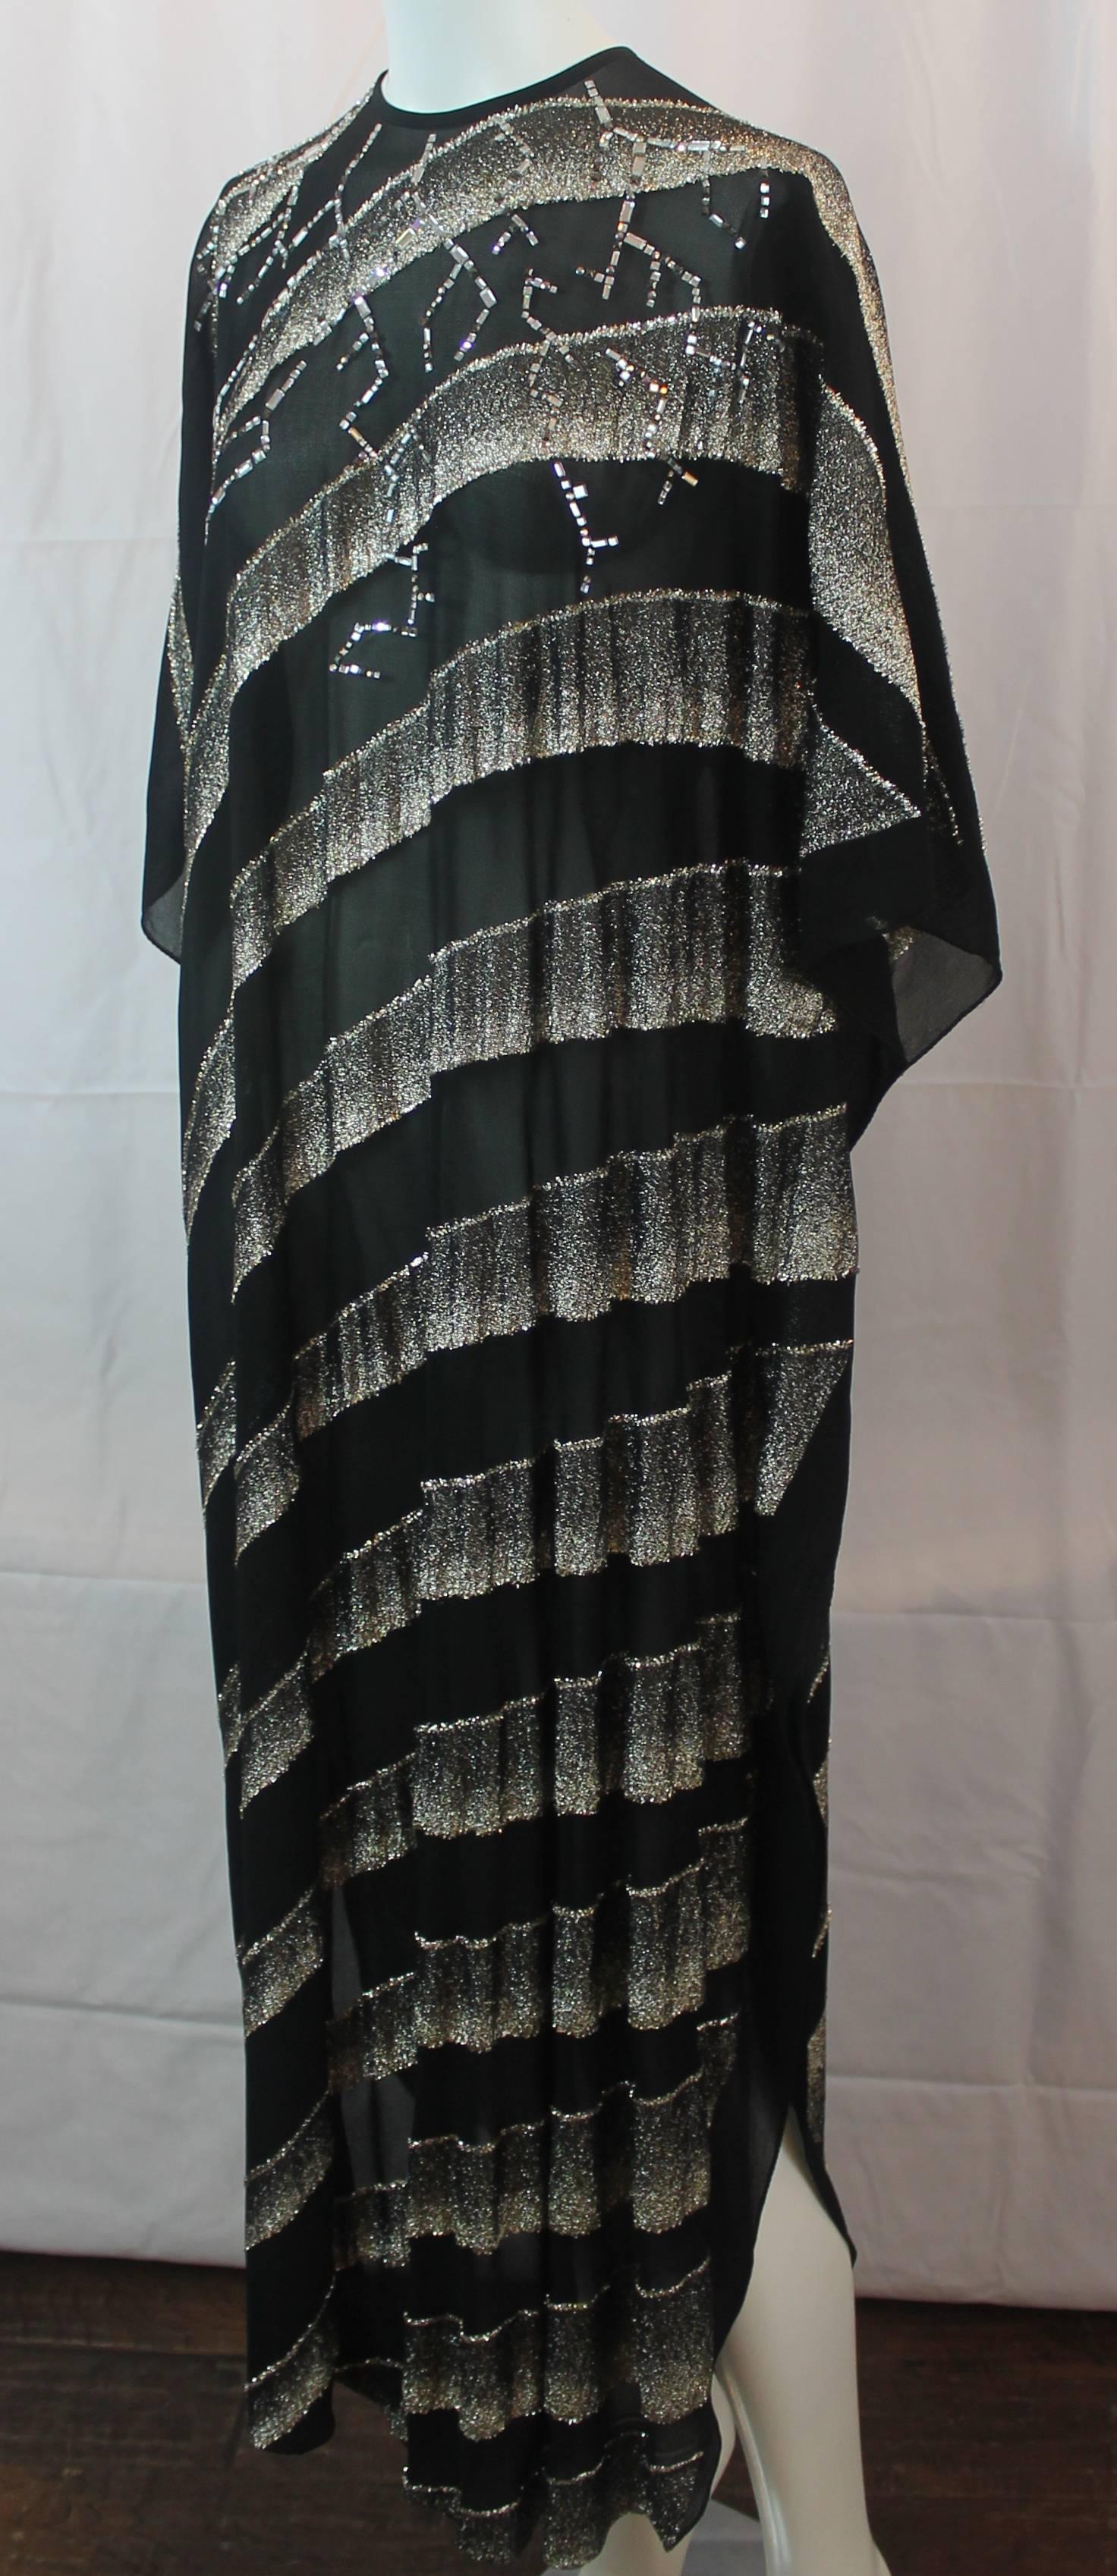 Libertine Black and Gold Silk Chiffon Caftan with Rhinestones - OS. This vintage sheer caftan is black with gold tinsel stripes. Around the neckline there is a rhinestone design. It is in excellent vintage condition showing only light wear. Its tags